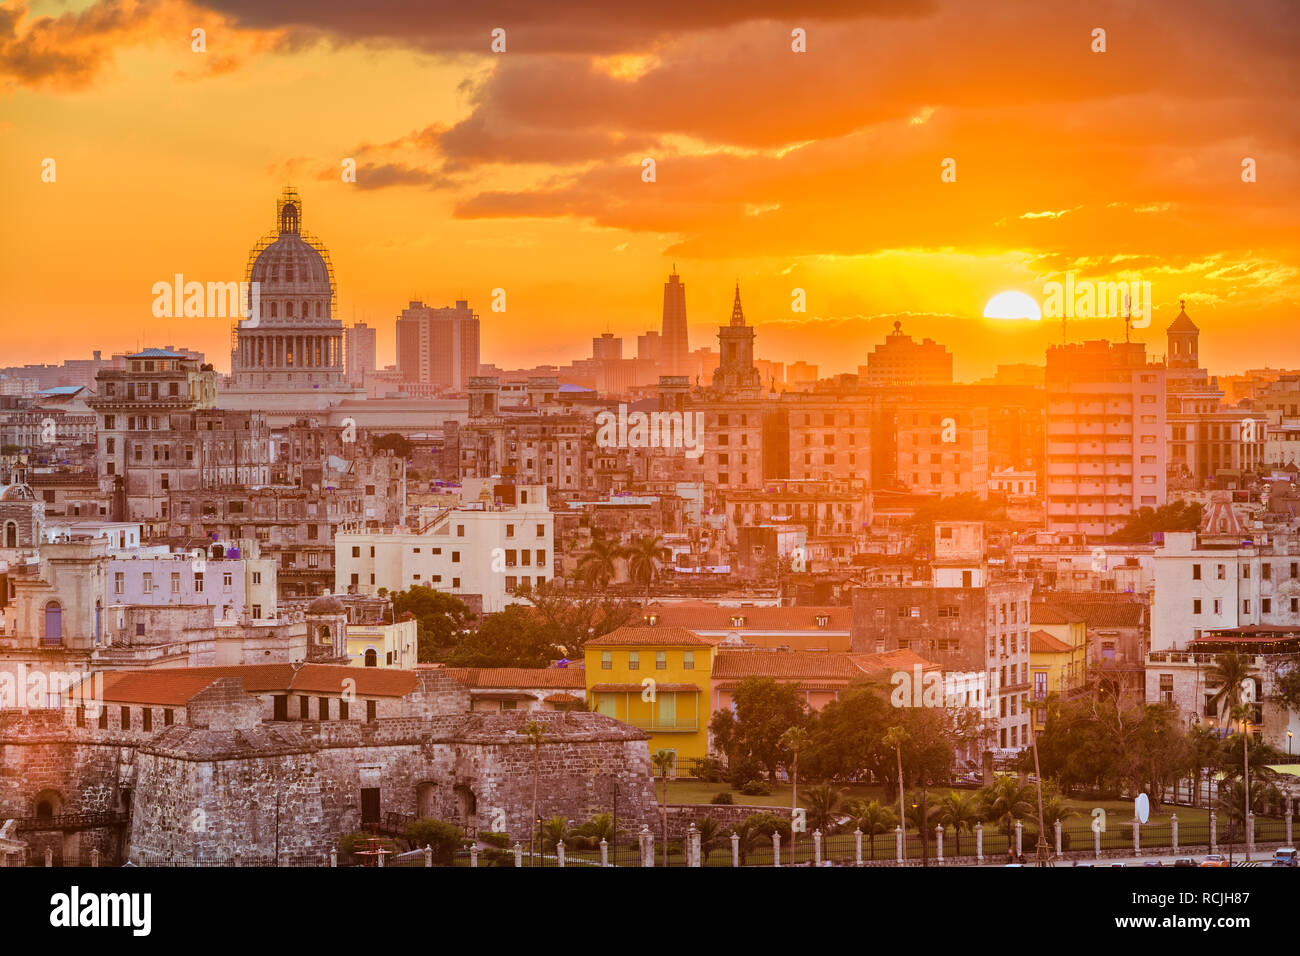 Havana, Cuba downtown skyline with the capitolio at sunset. Stock Photo